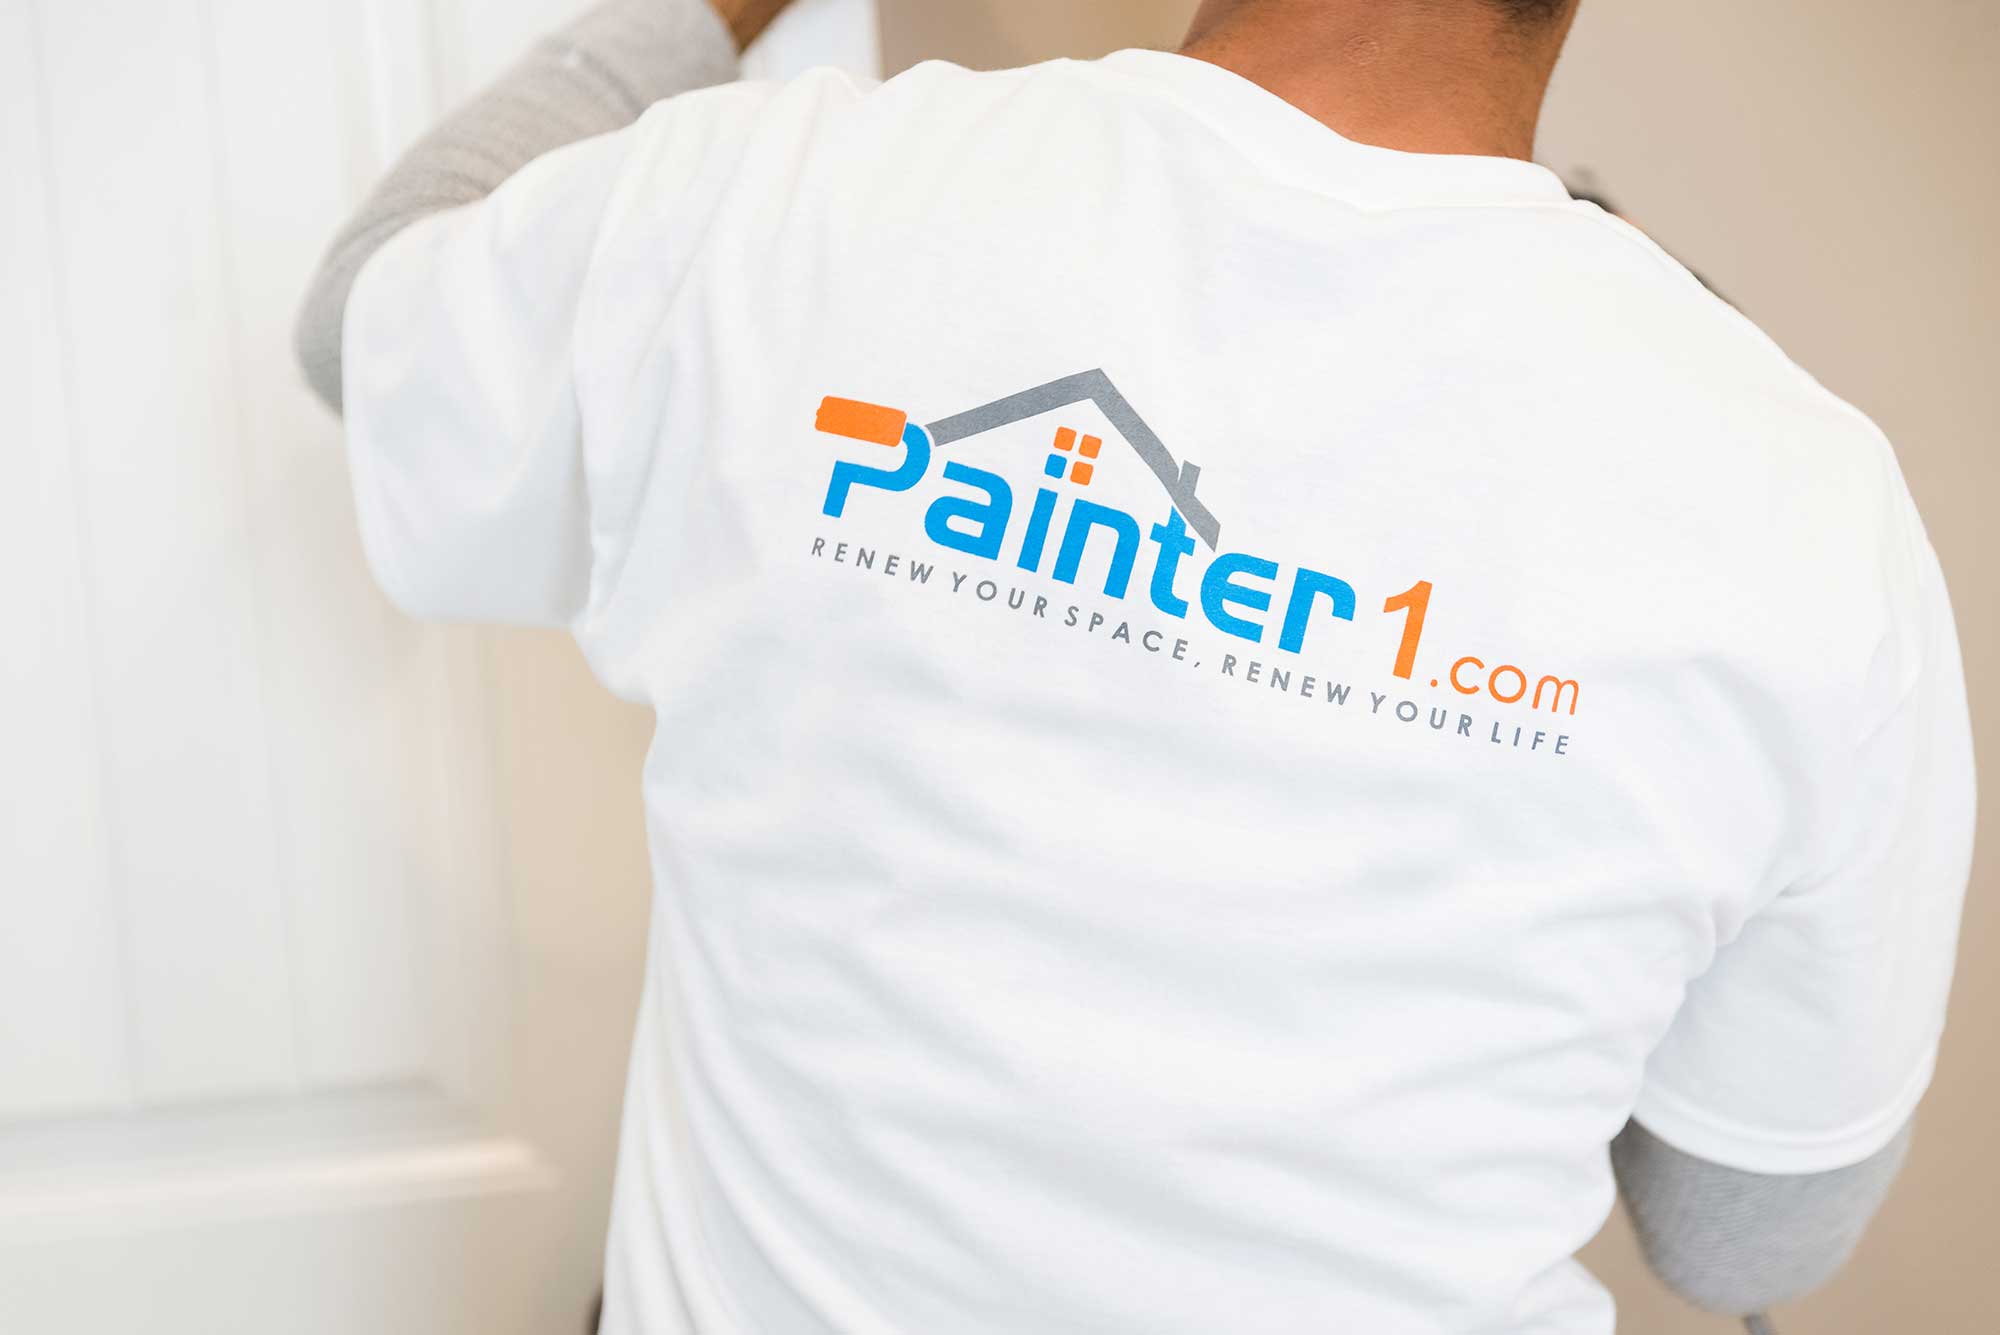 If you are searching for wallpaper removal in Park City / Heber Valley, Painter1 offers professional wallpaper removal in Park City / Heber Valley.